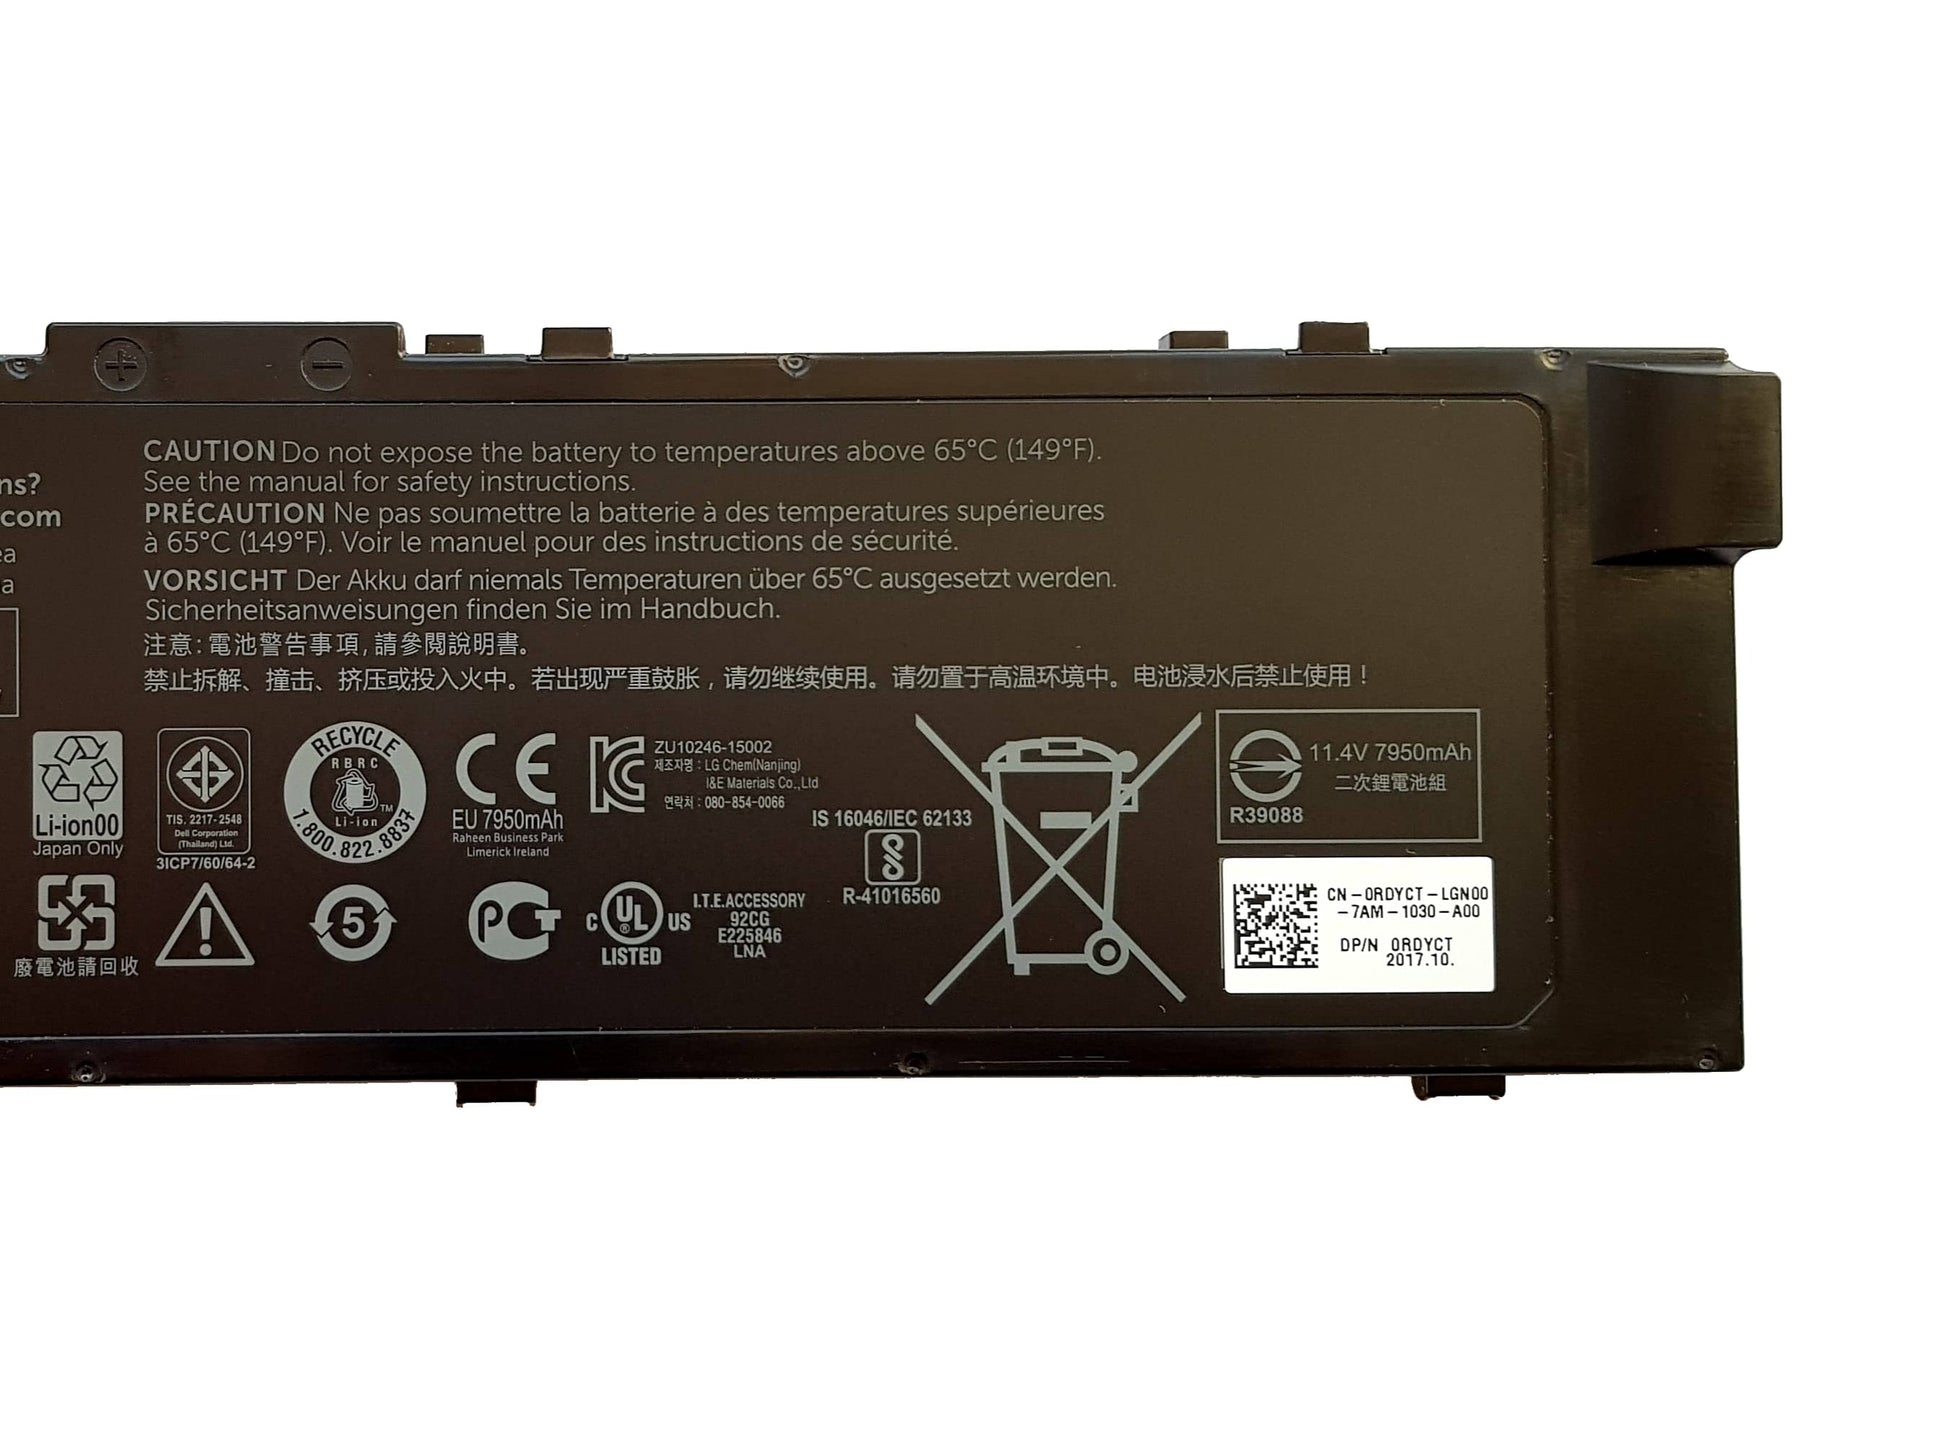 Genuine replacement Products Dell Precision 7510, 7710 Laptop Battery 91Wh 6 Cell MFKVP RDYCT TWCPG